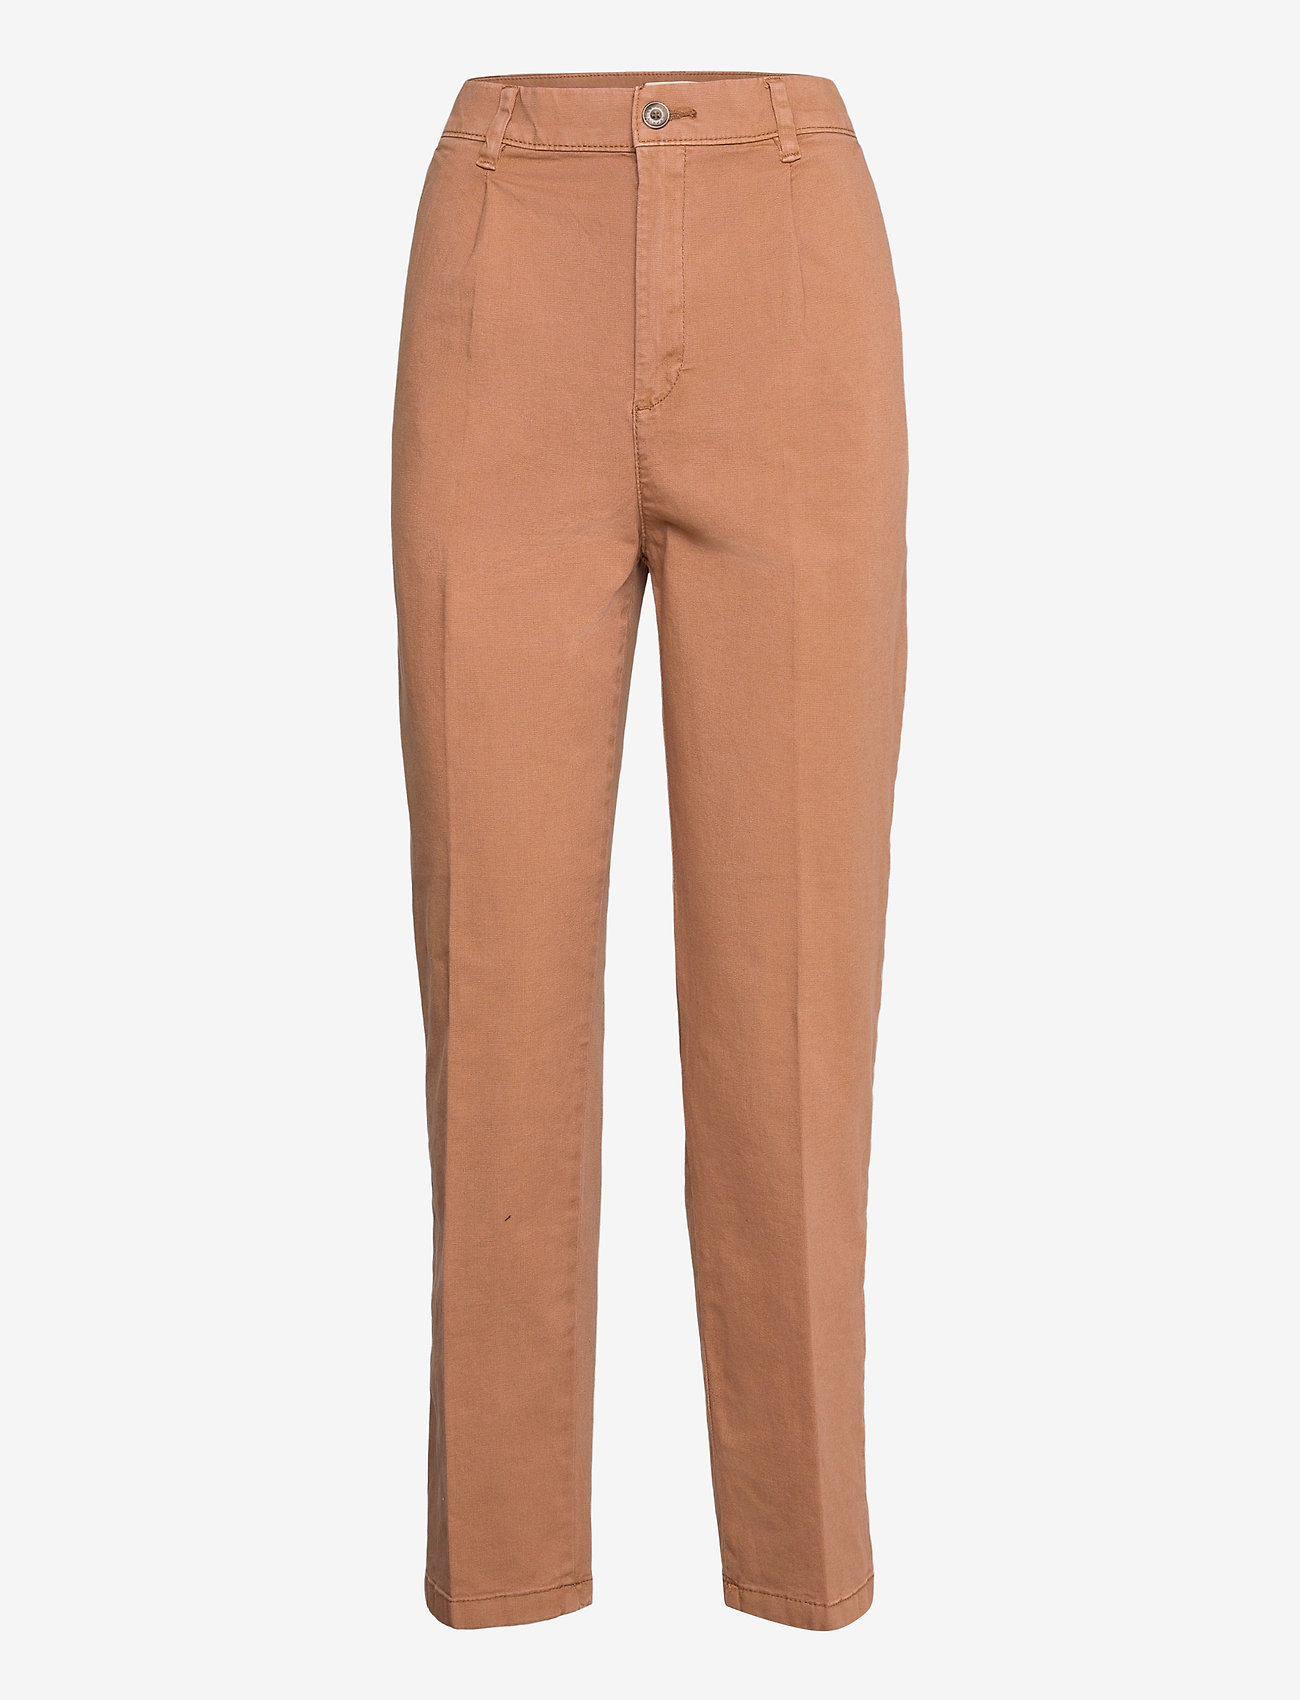 Esprit Casual - Chinos with organic cotton - chinos - rust brown - 0